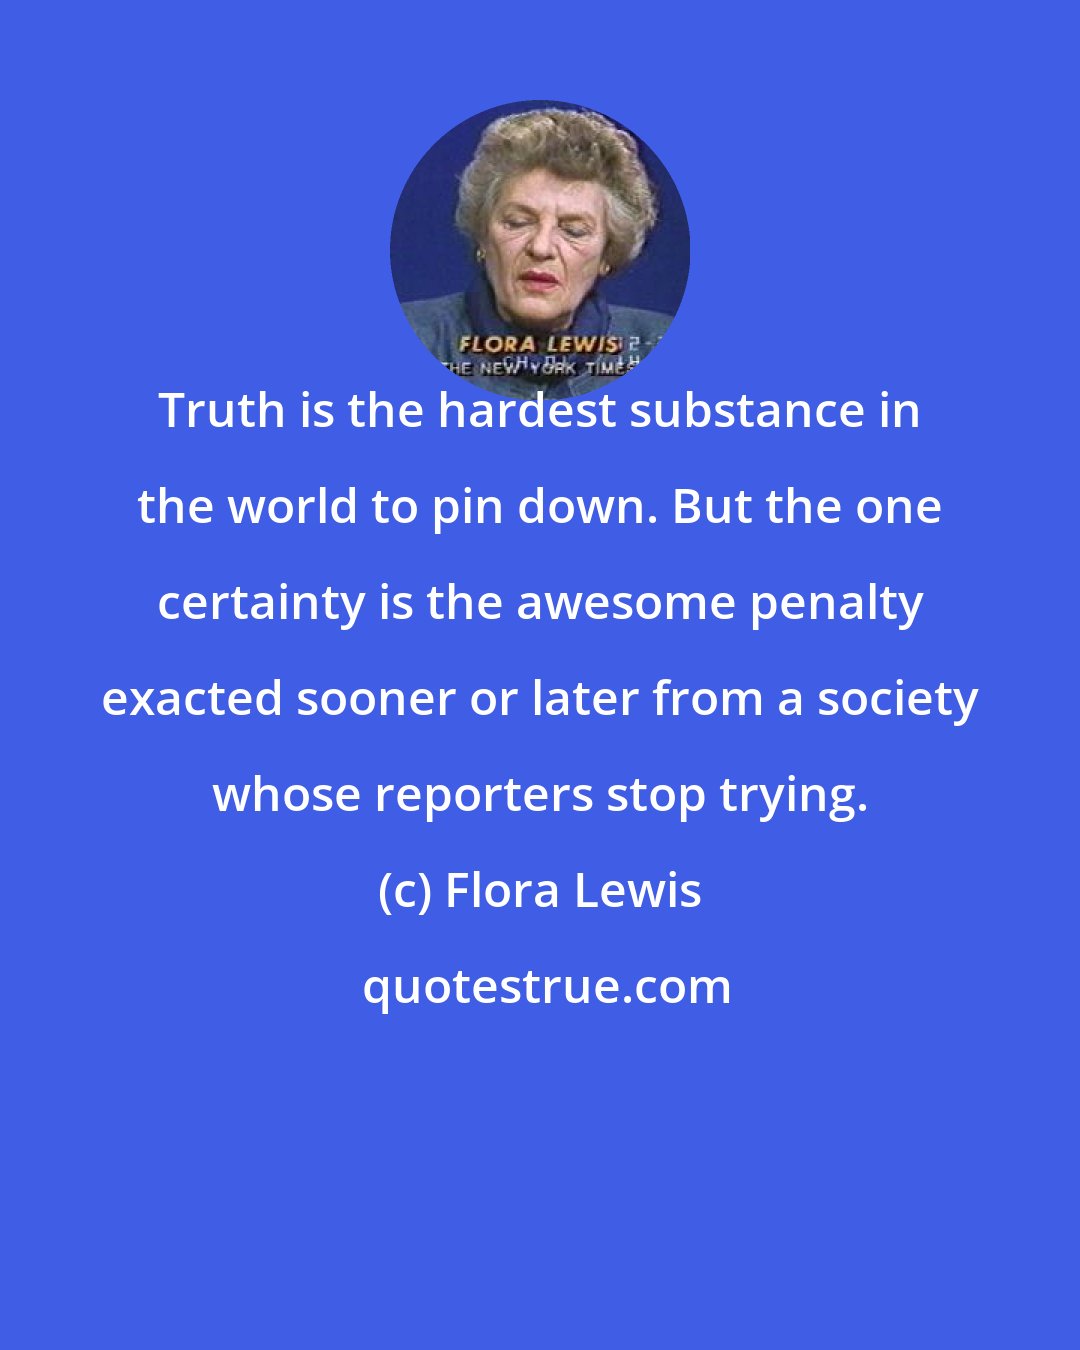 Flora Lewis: Truth is the hardest substance in the world to pin down. But the one certainty is the awesome penalty exacted sooner or later from a society whose reporters stop trying.